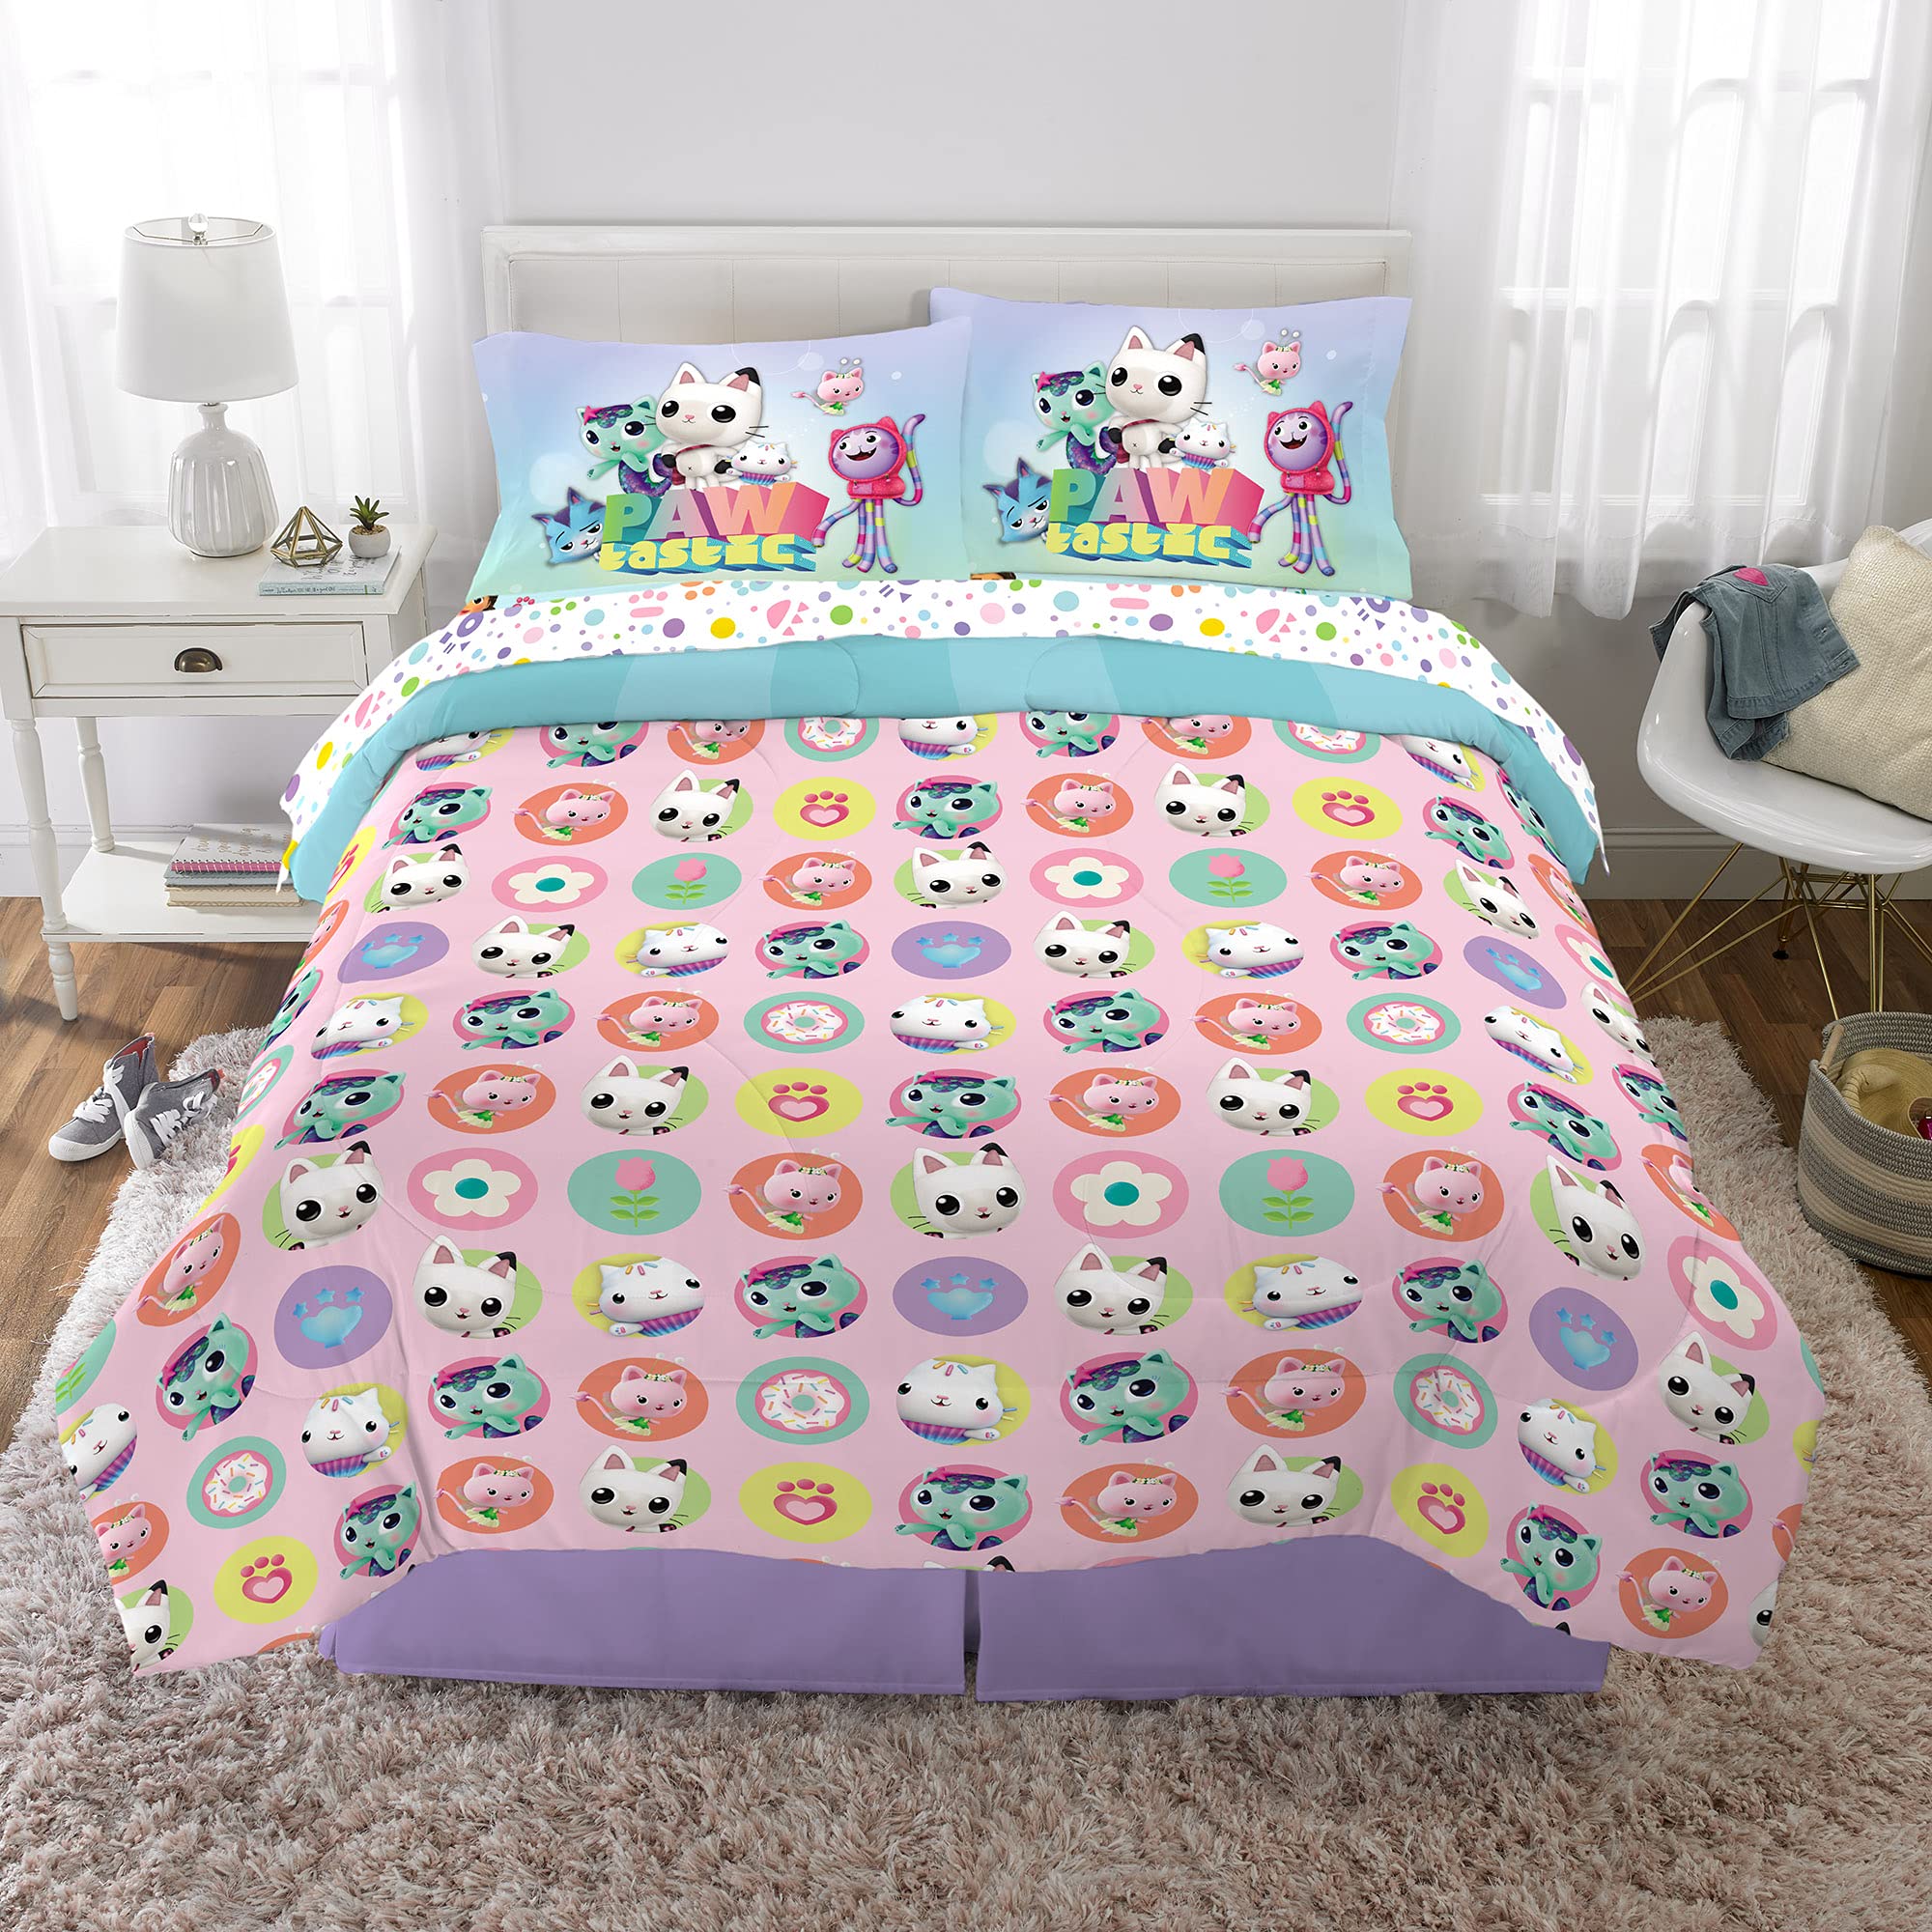 DreamWorks Gabby's Dollhouse Cakey, MerCat And Pandy Kids Bedding Super Soft Comforter And Sheet Set, 5 Piece Full Size, By Franco.